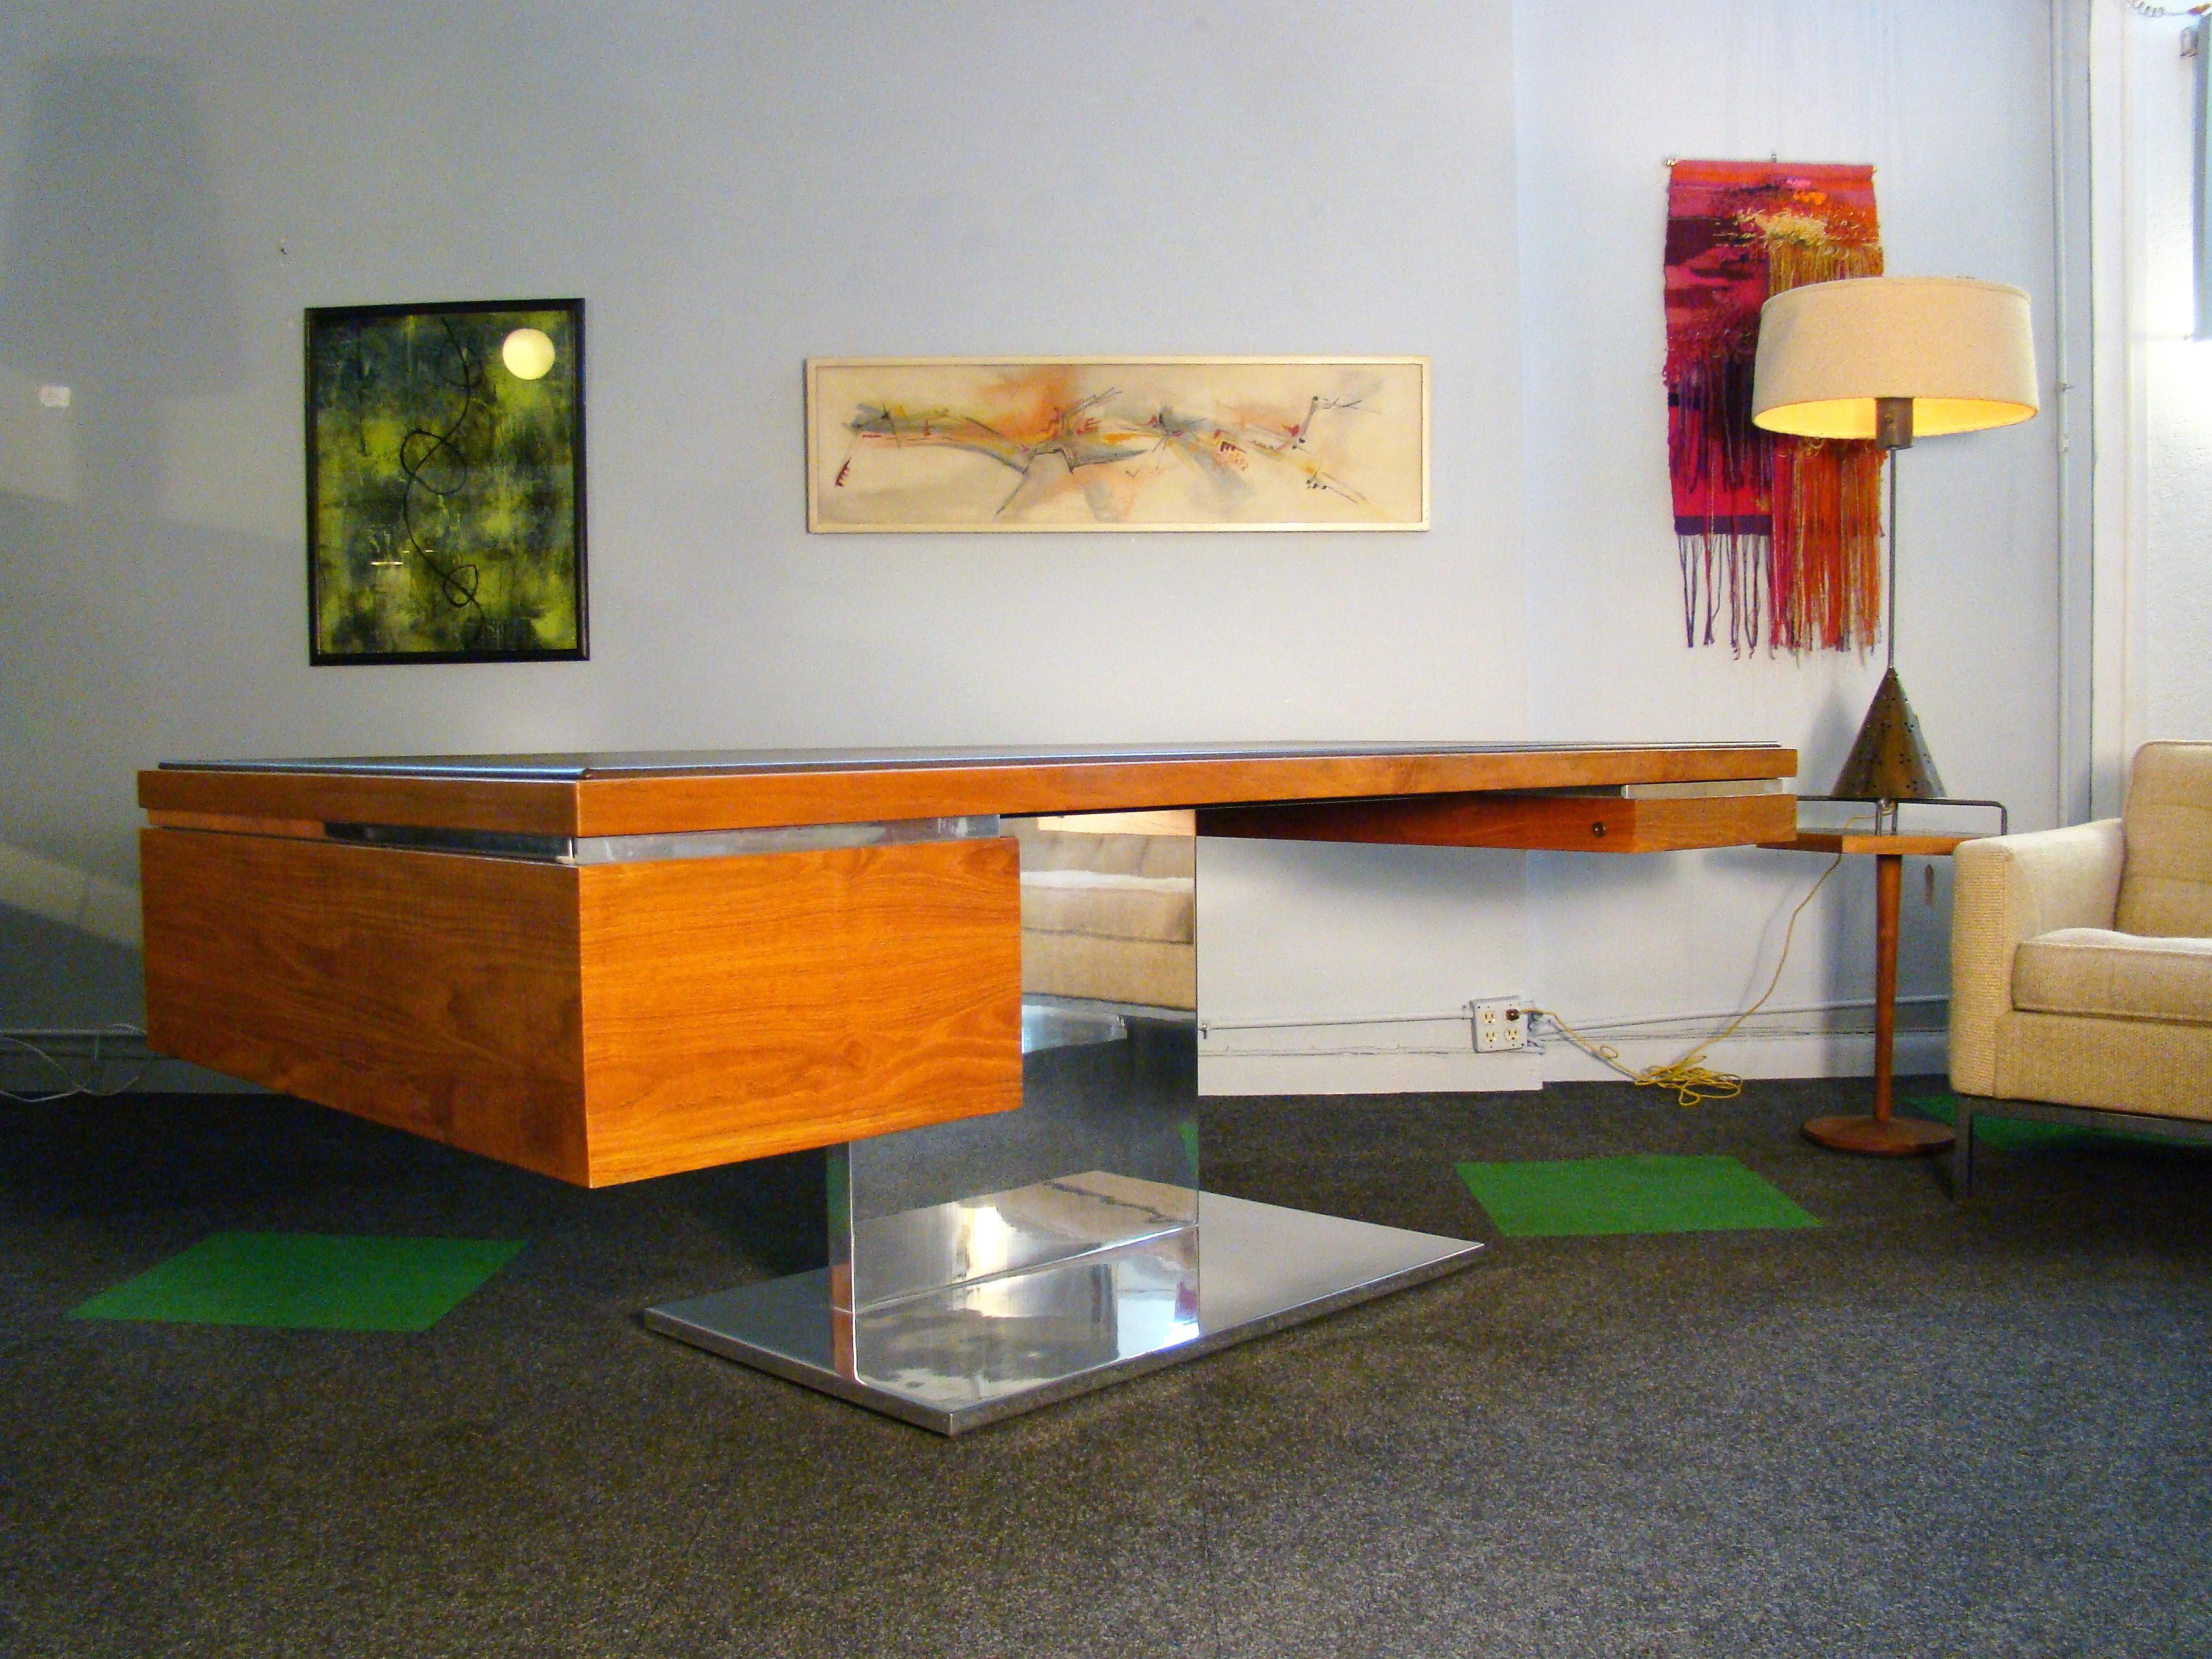 Magnificent midcentury executive desk by Warren Platner for Lehigh-Leopold / Litton (USA) in teak veneers, walnut solids, leather and polished stainless steel. Designed in the late 1960s, this example was made to order in 1983 at a cost of